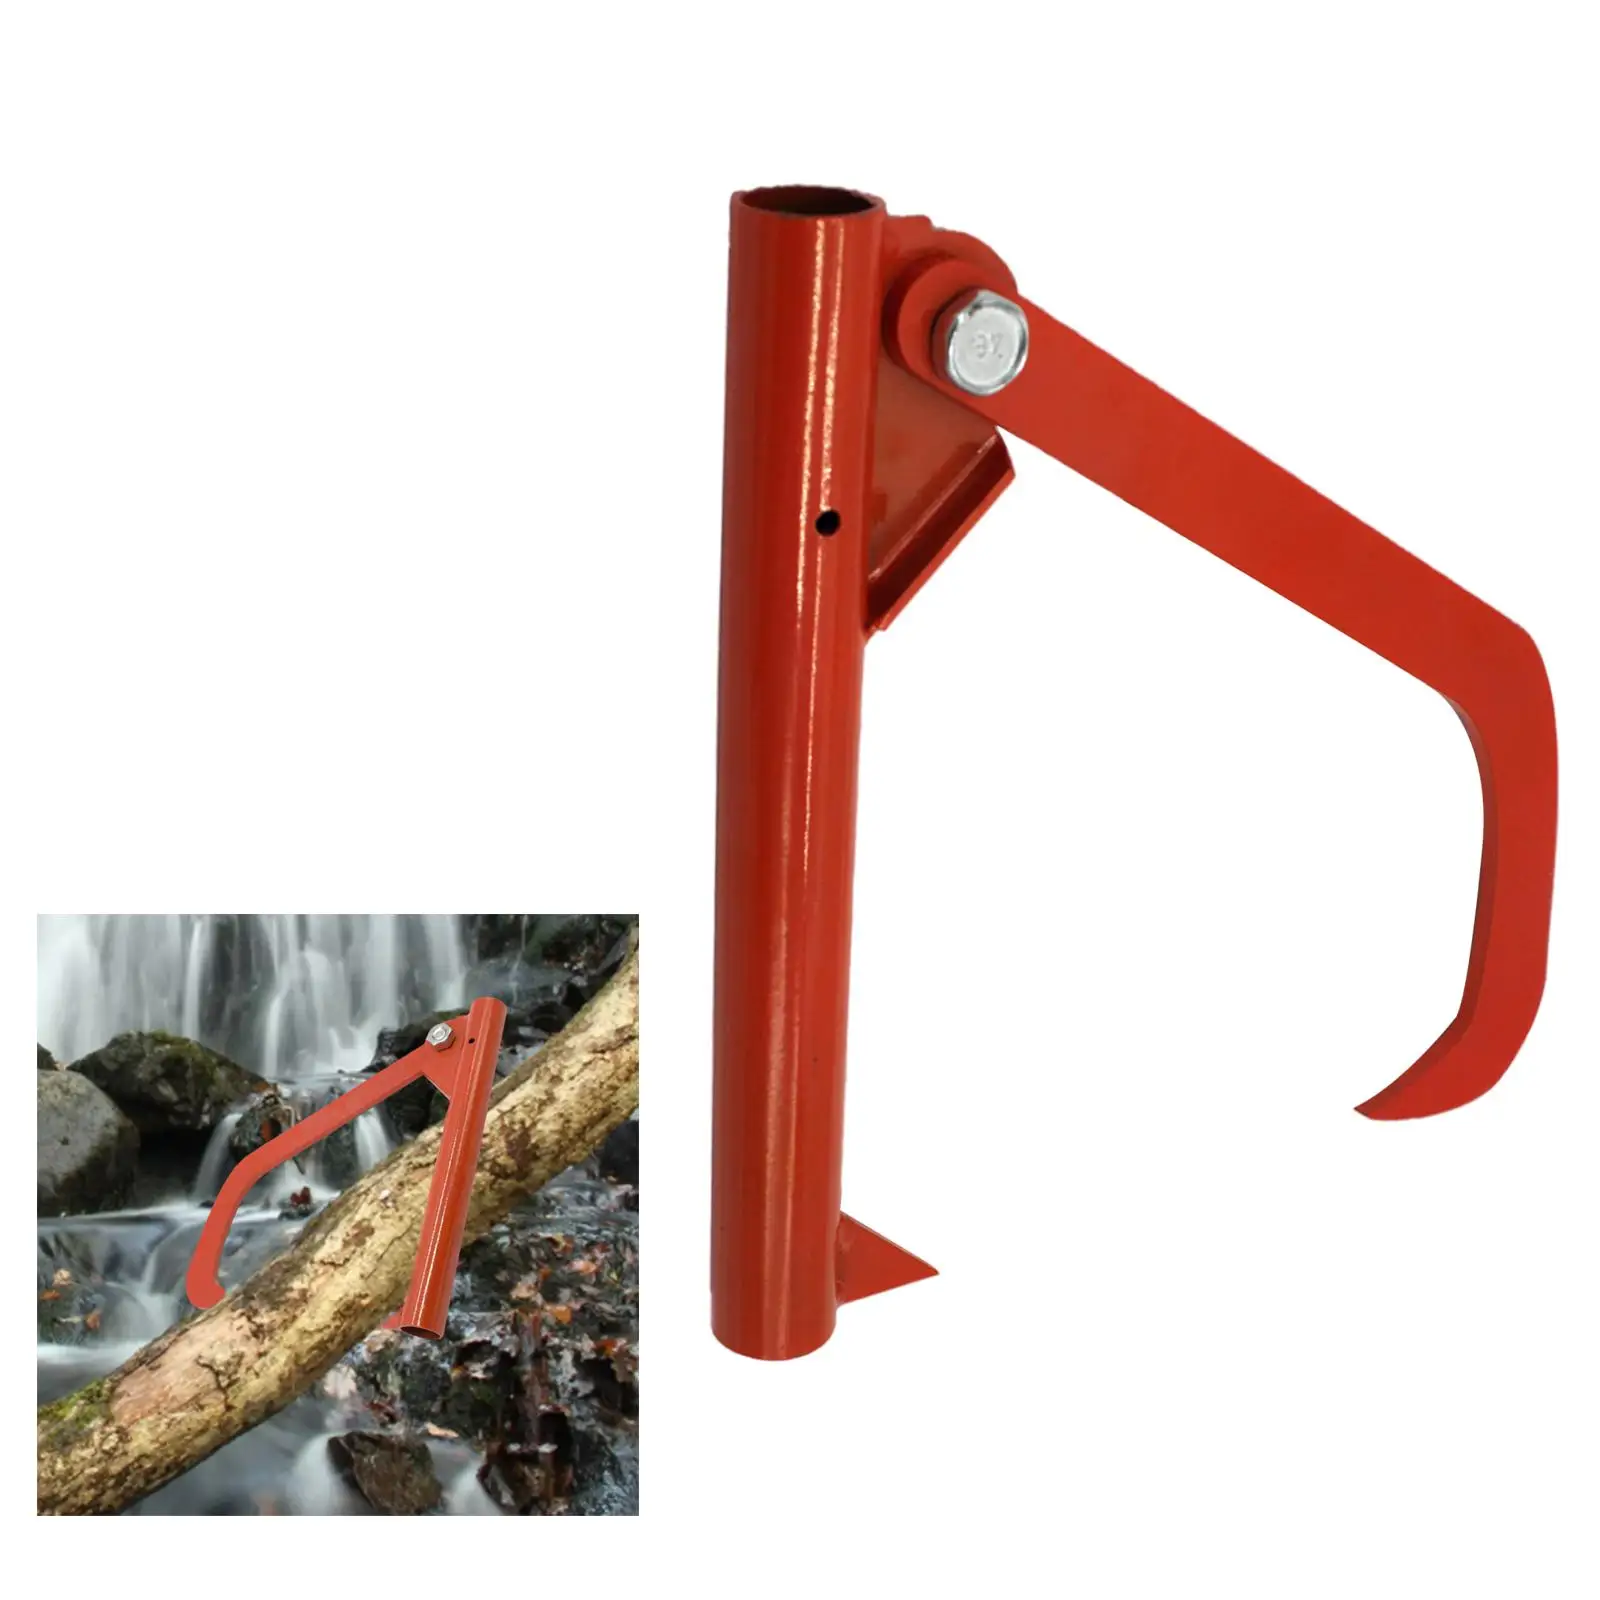 Log Roller Log Lifter Hook Steel Peavey Practical Durable Home Transport Cant Hook for Patio